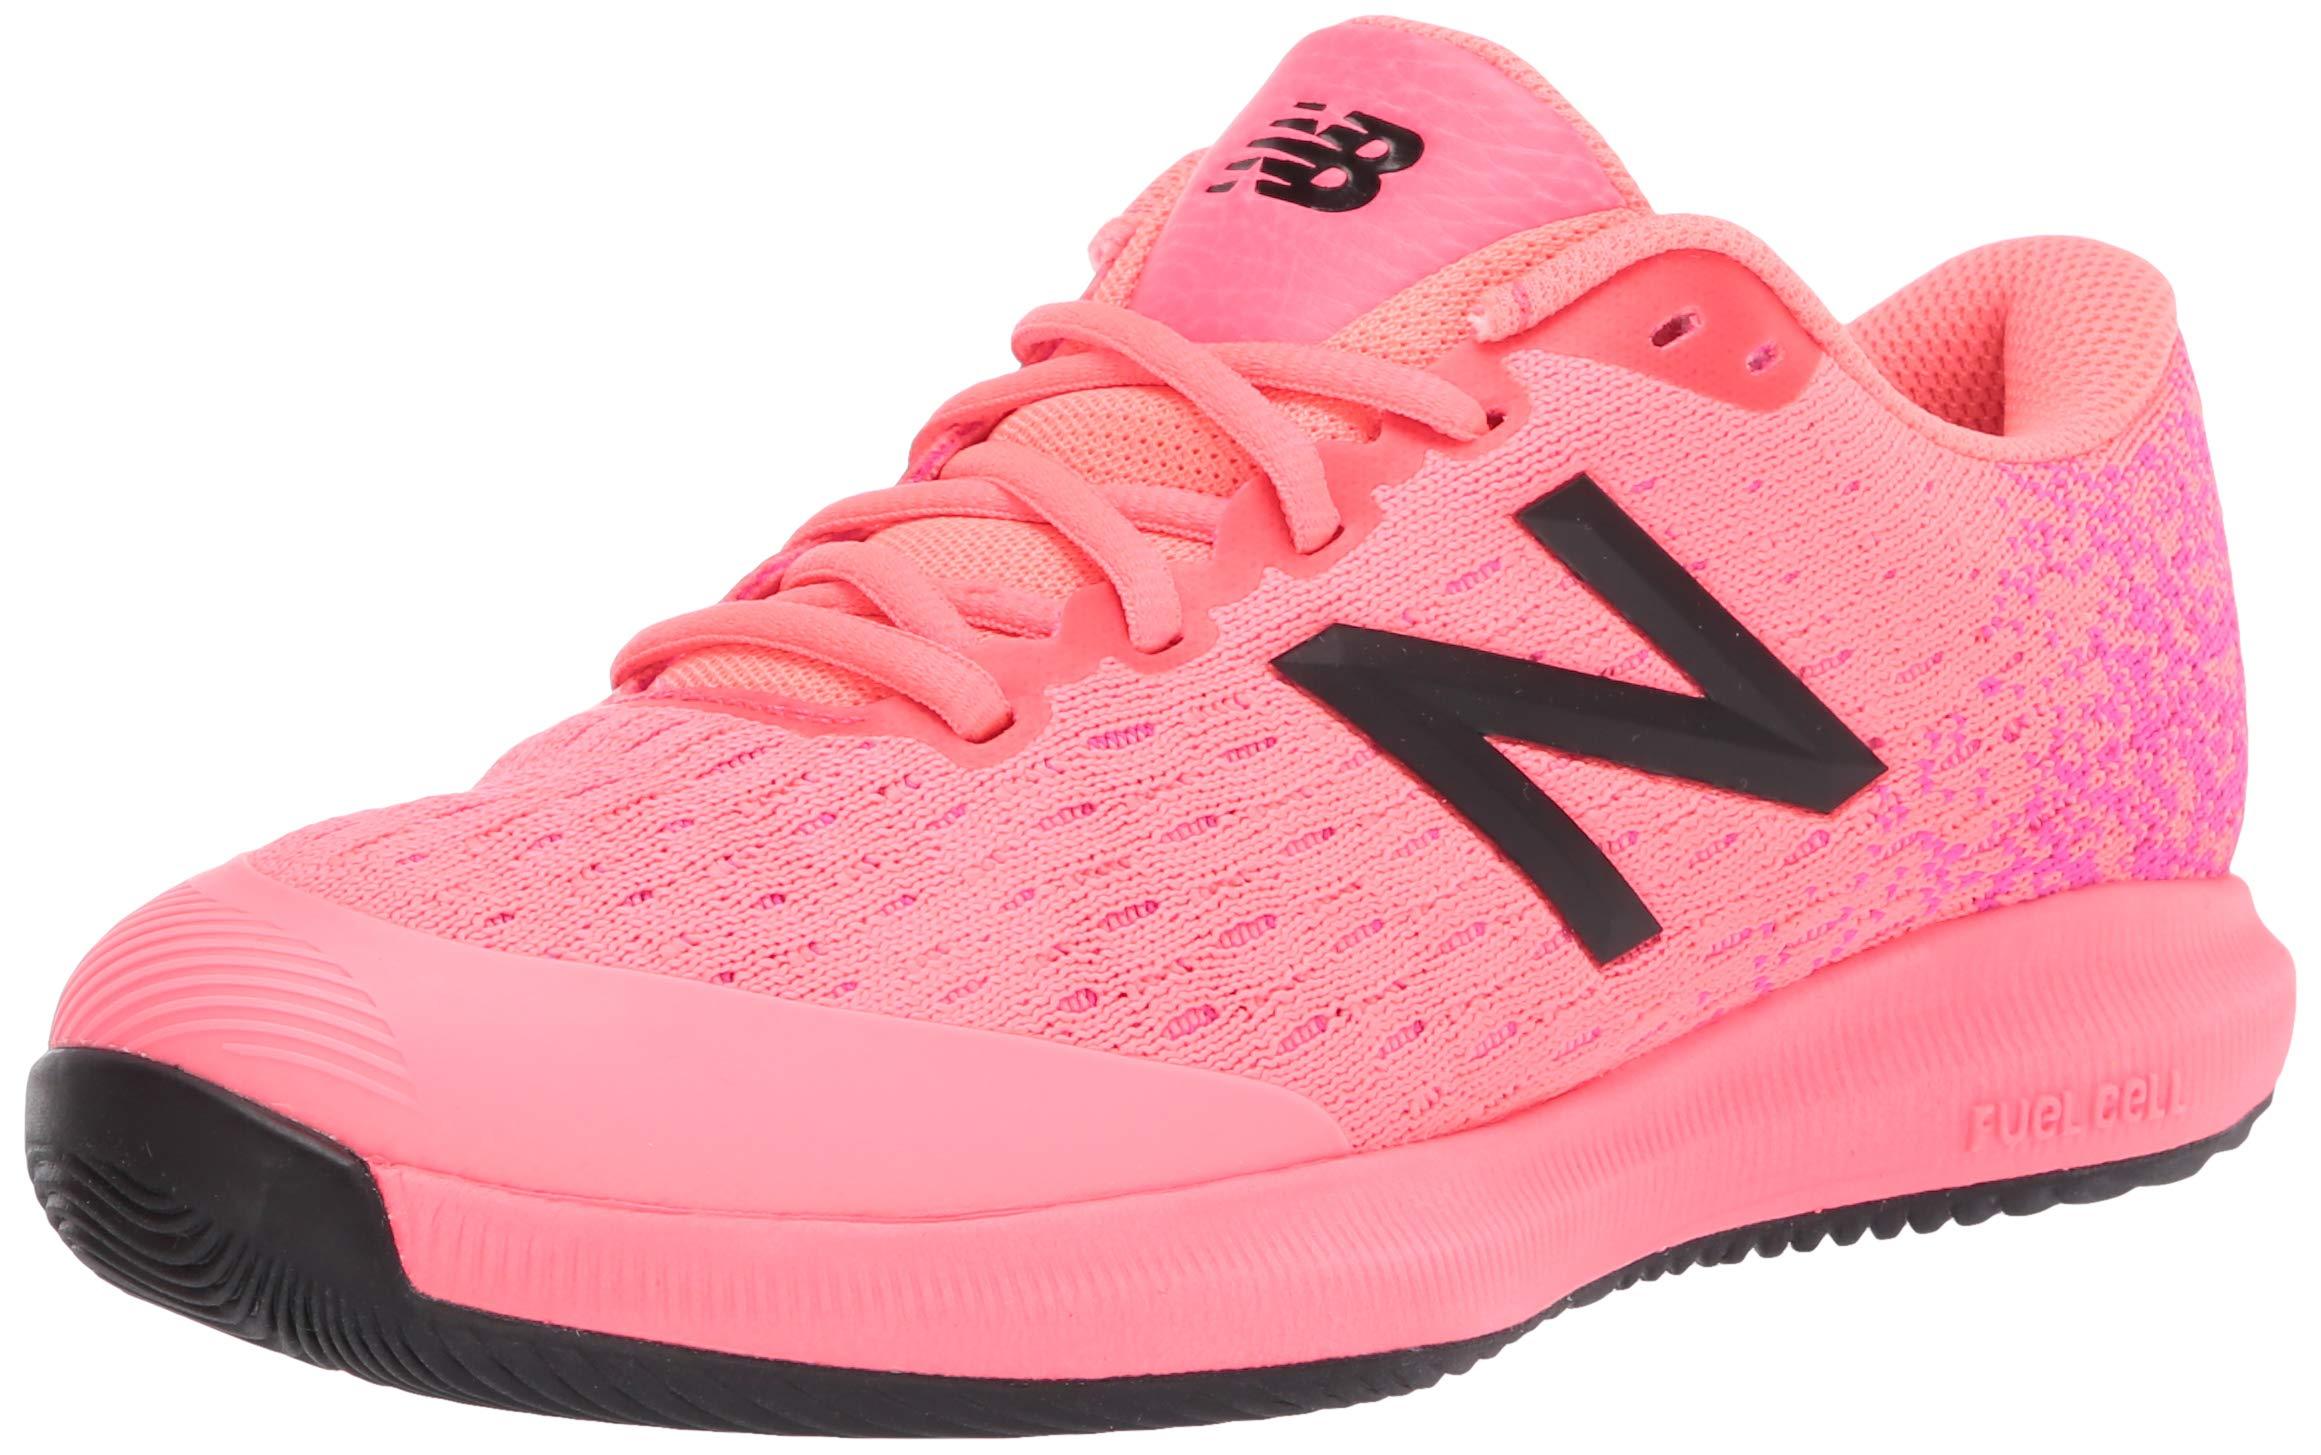 New Balance 996v4 Hard Court Tennis Shoe in Pink | Lyst